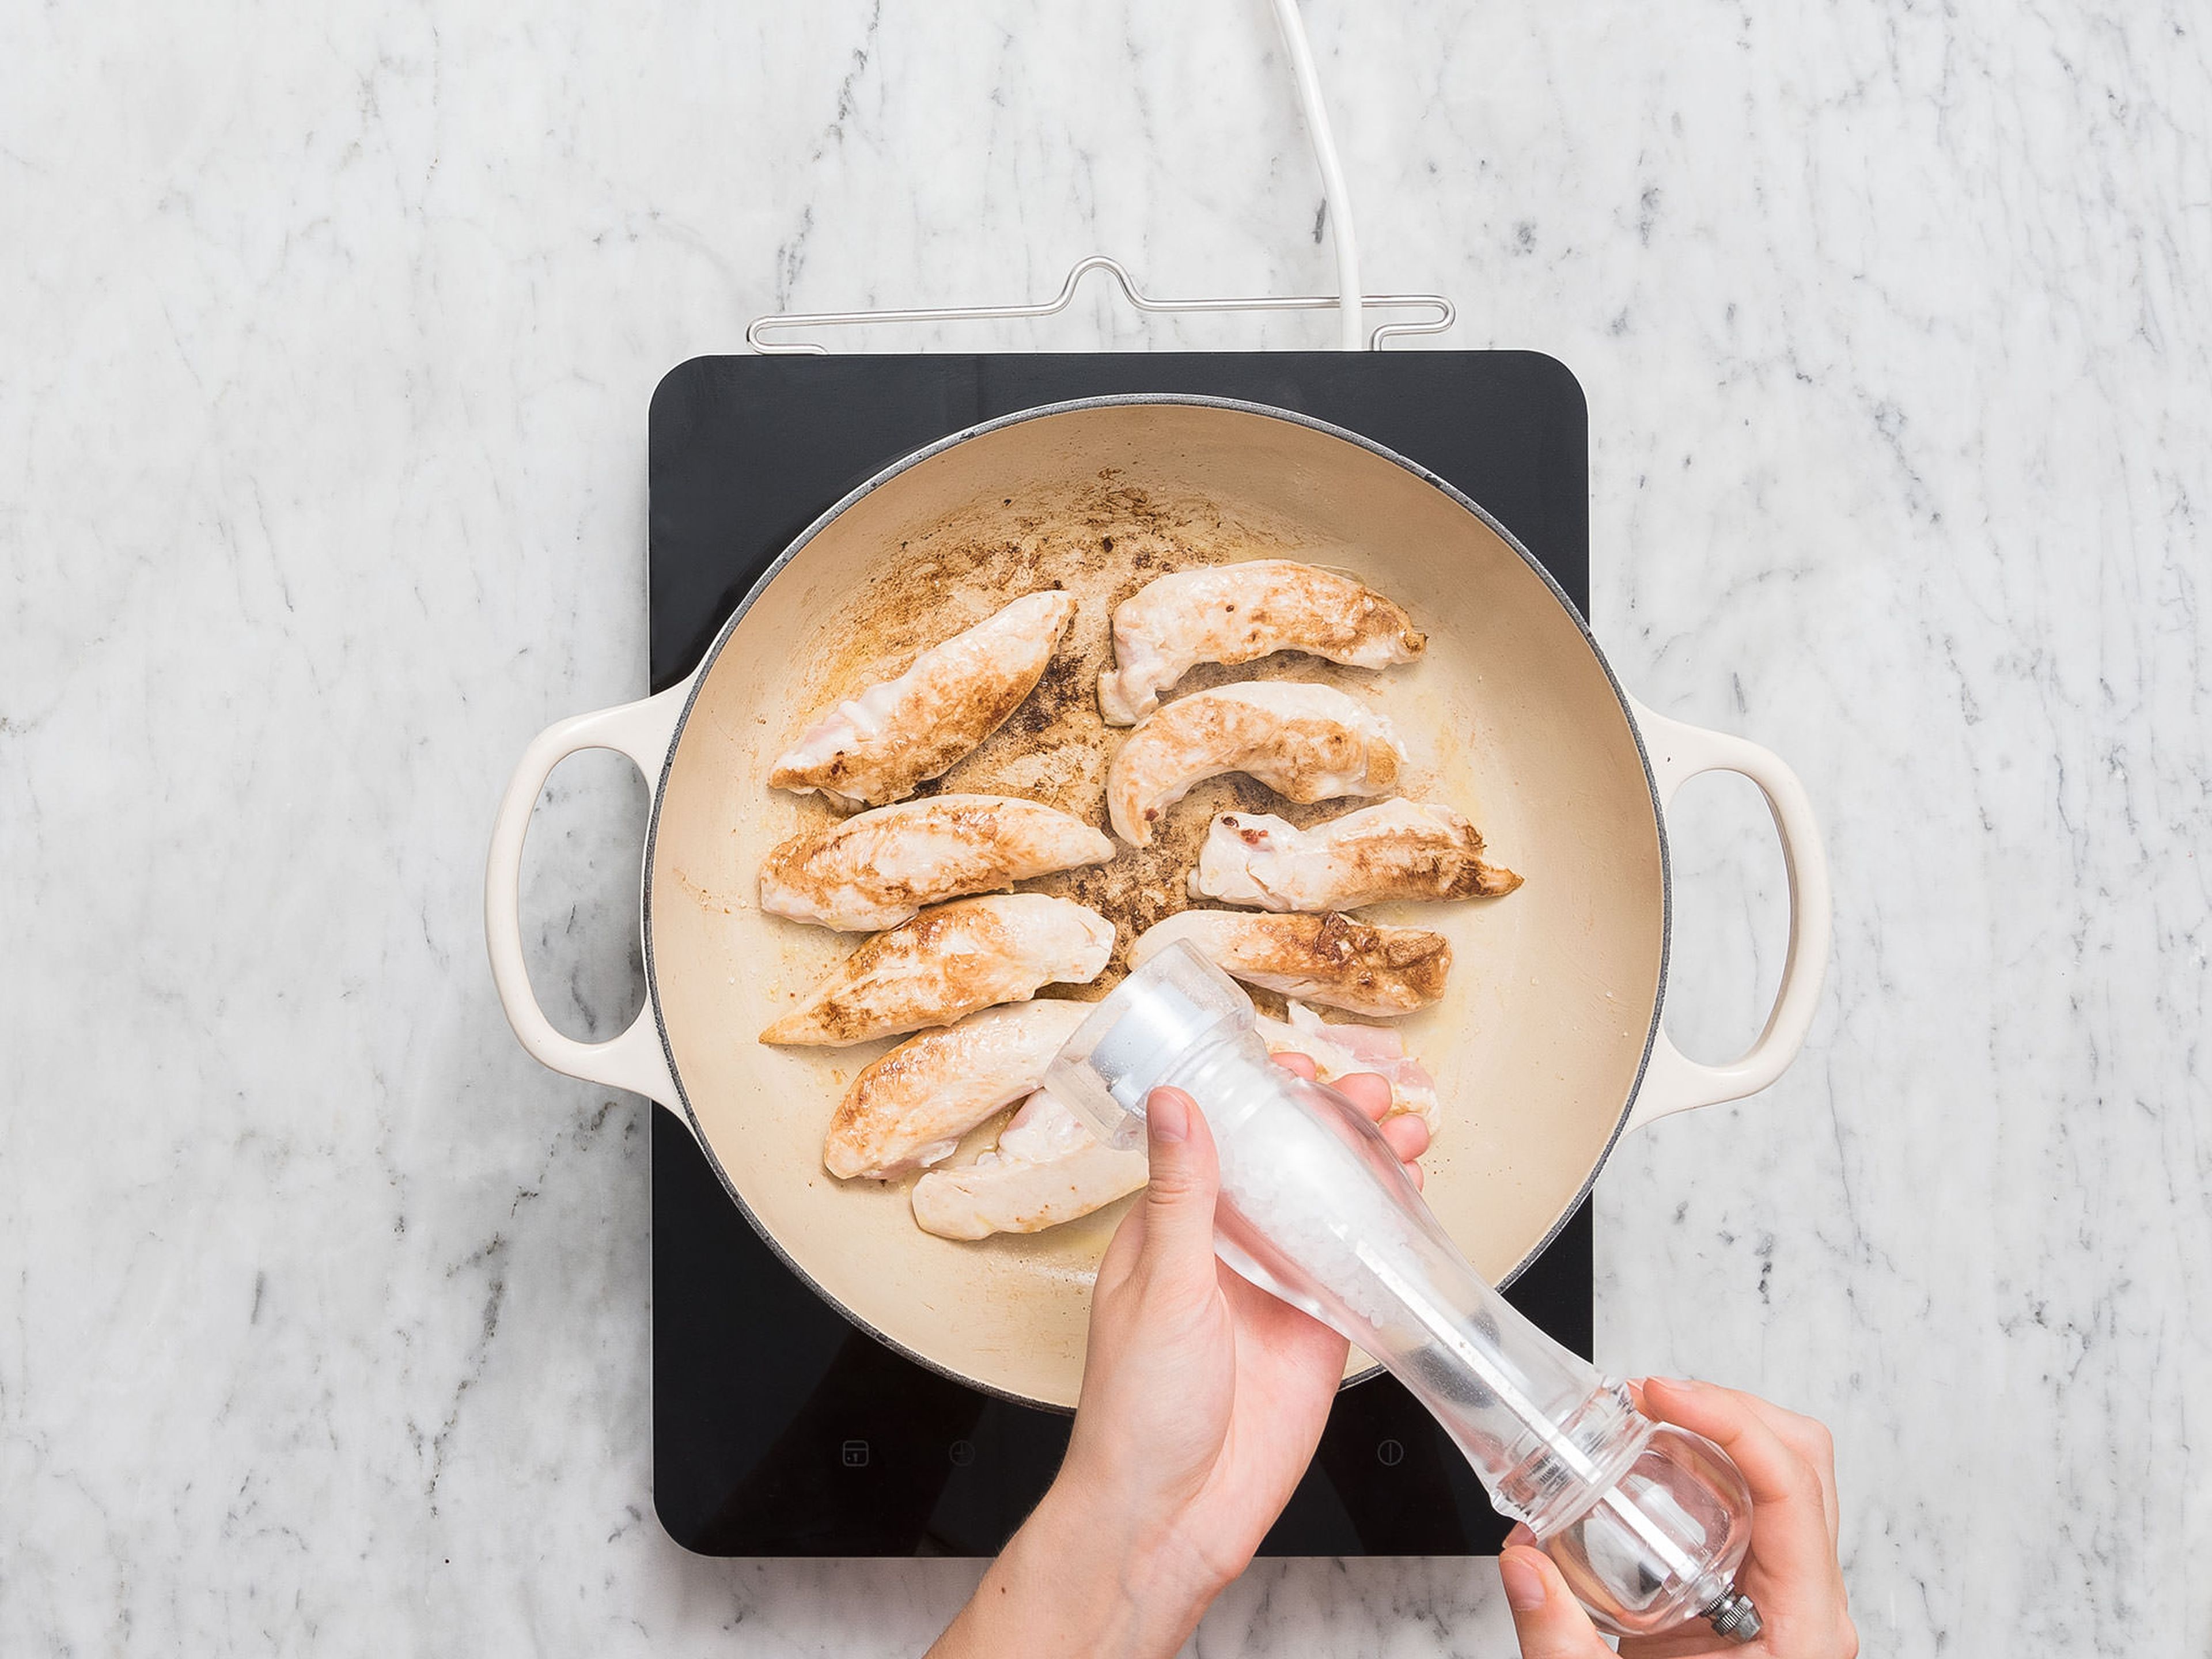 Heat oil in the same pan over medium heat. Salt chicken breast and sear on both sides for approx. 1 – 2 min. or until slightly browned. Remove from pan and set aside.